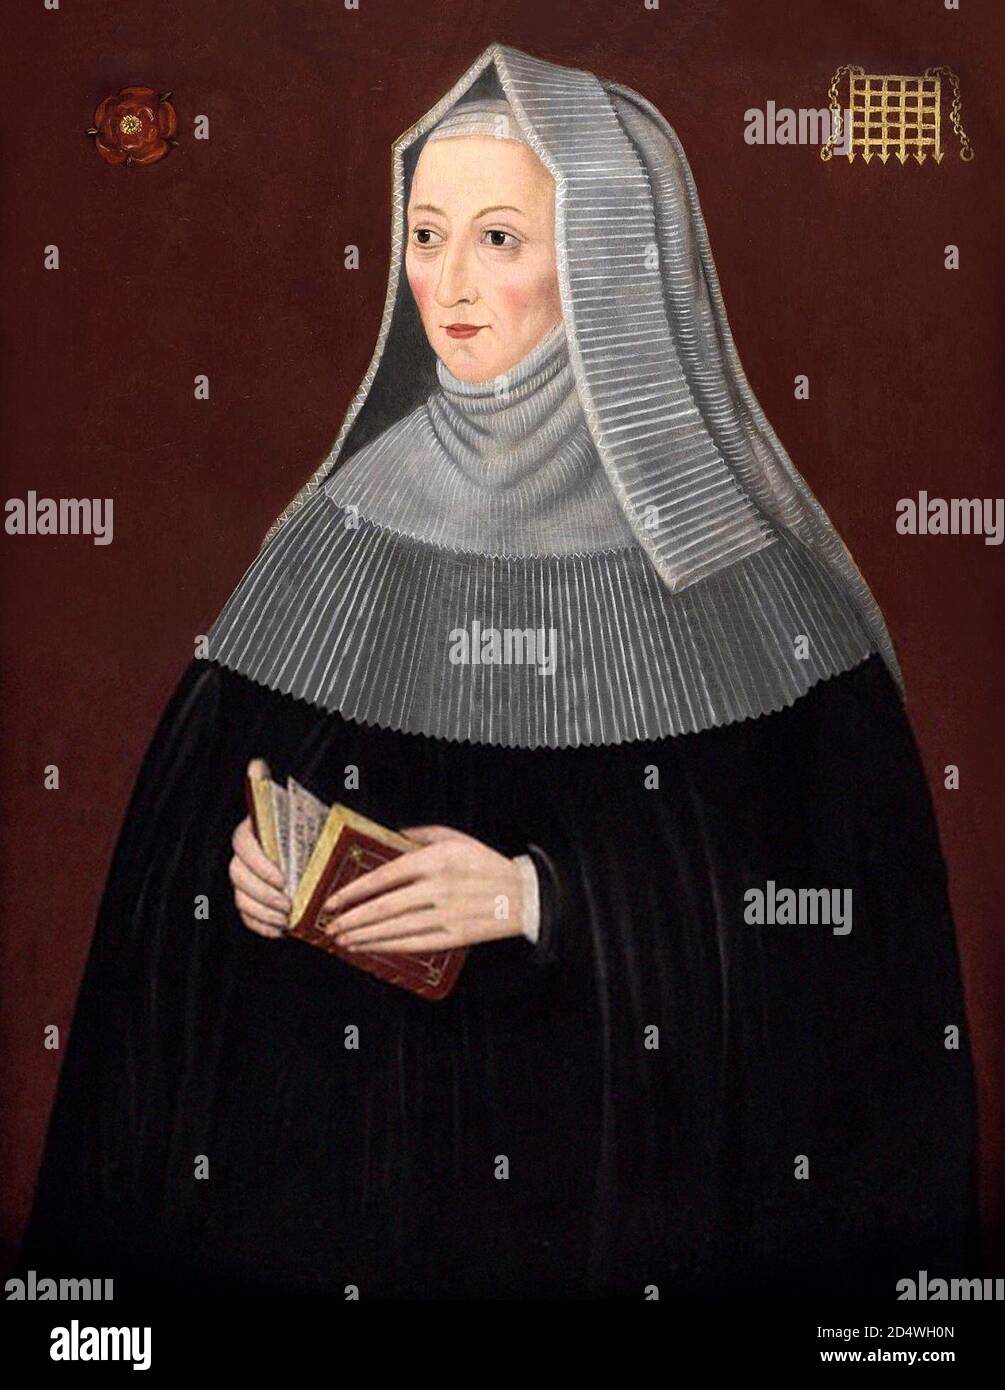 Margaret Beaufort. Portrait of Lady Margaret Beaufort (c.1441/3-1509) second half of 16th century. Margaret Beaufort was a major figure in the Wars of the Roses and the mother of King Henry VII of England Stock Photo